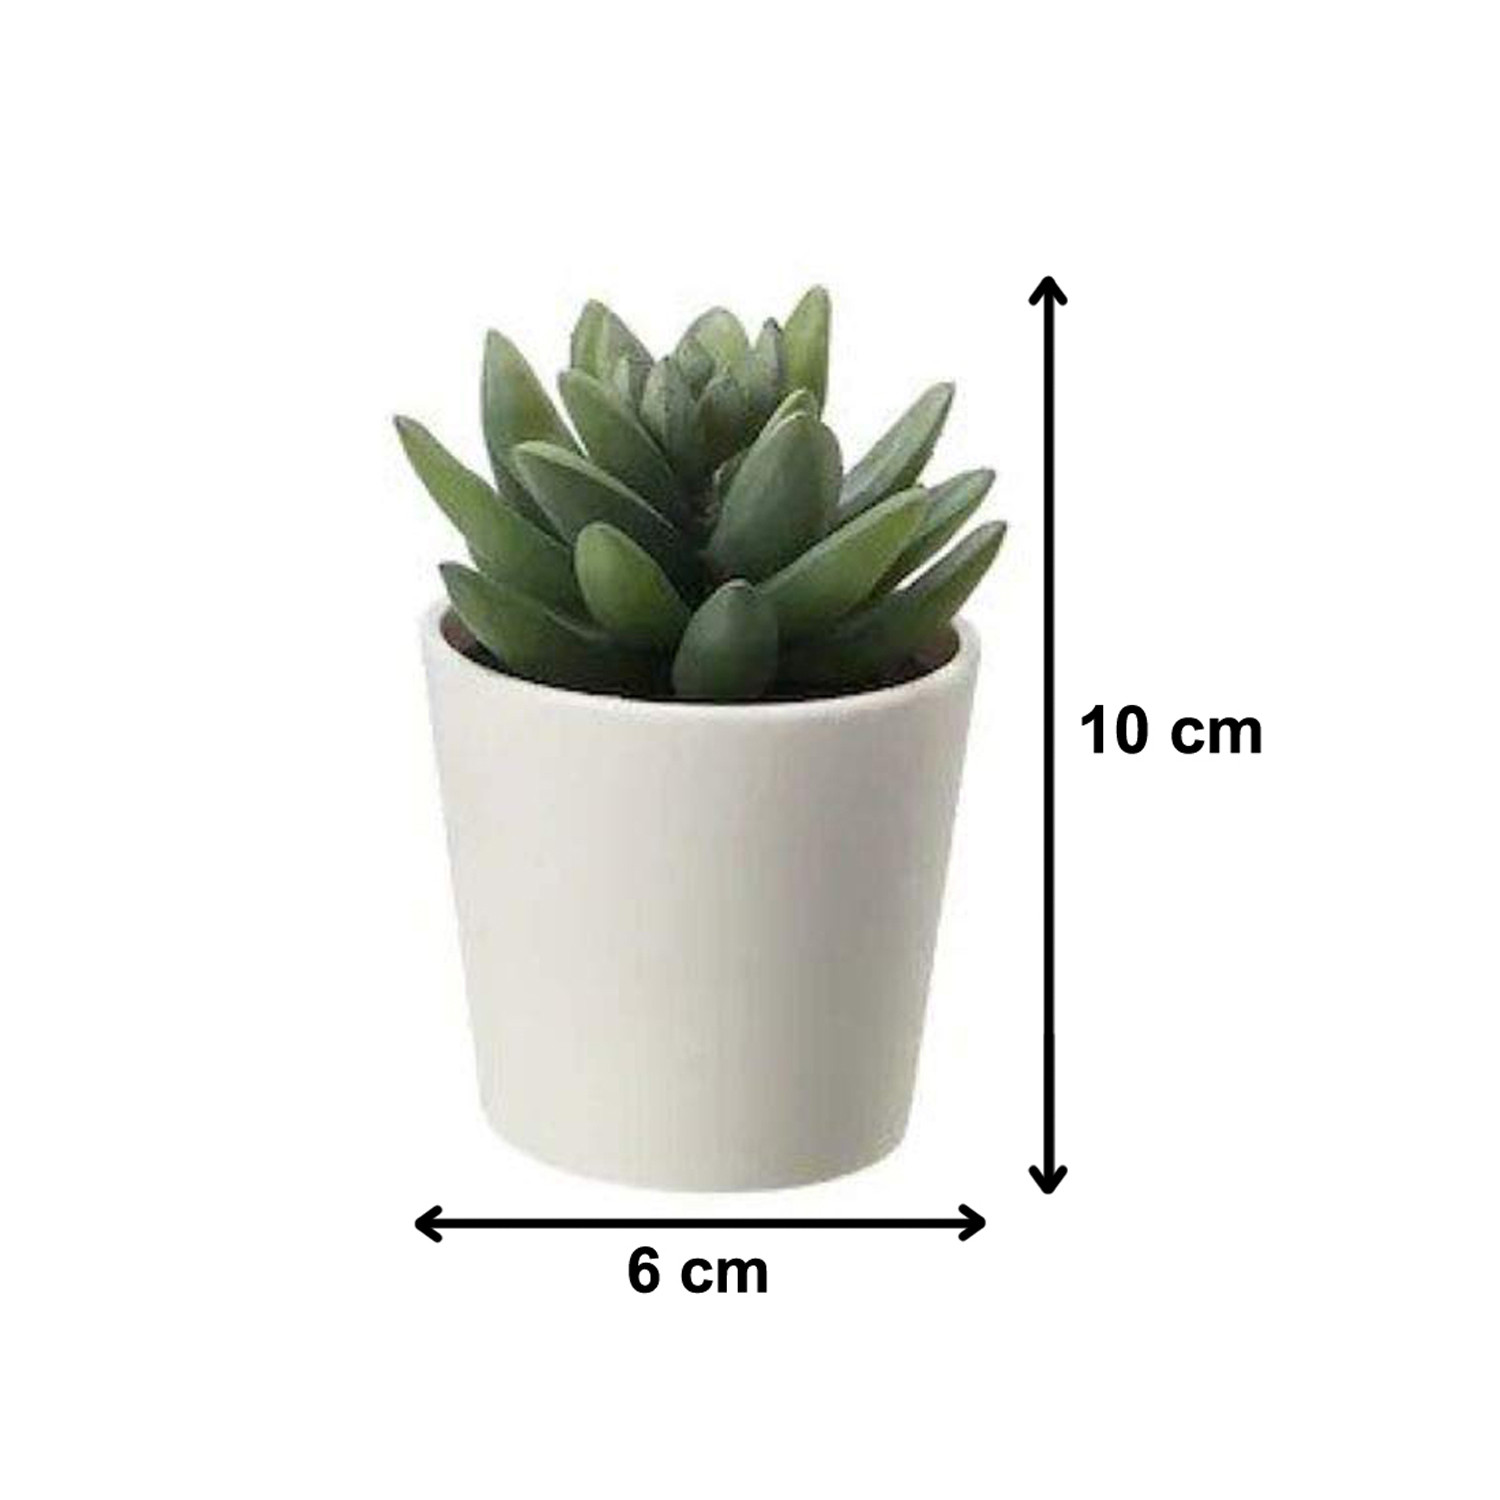 Kuber Industries Artificial Set of 3 Mini Realistic Fake Plants with Plastic Pots for Home and Office Decoration (Green)